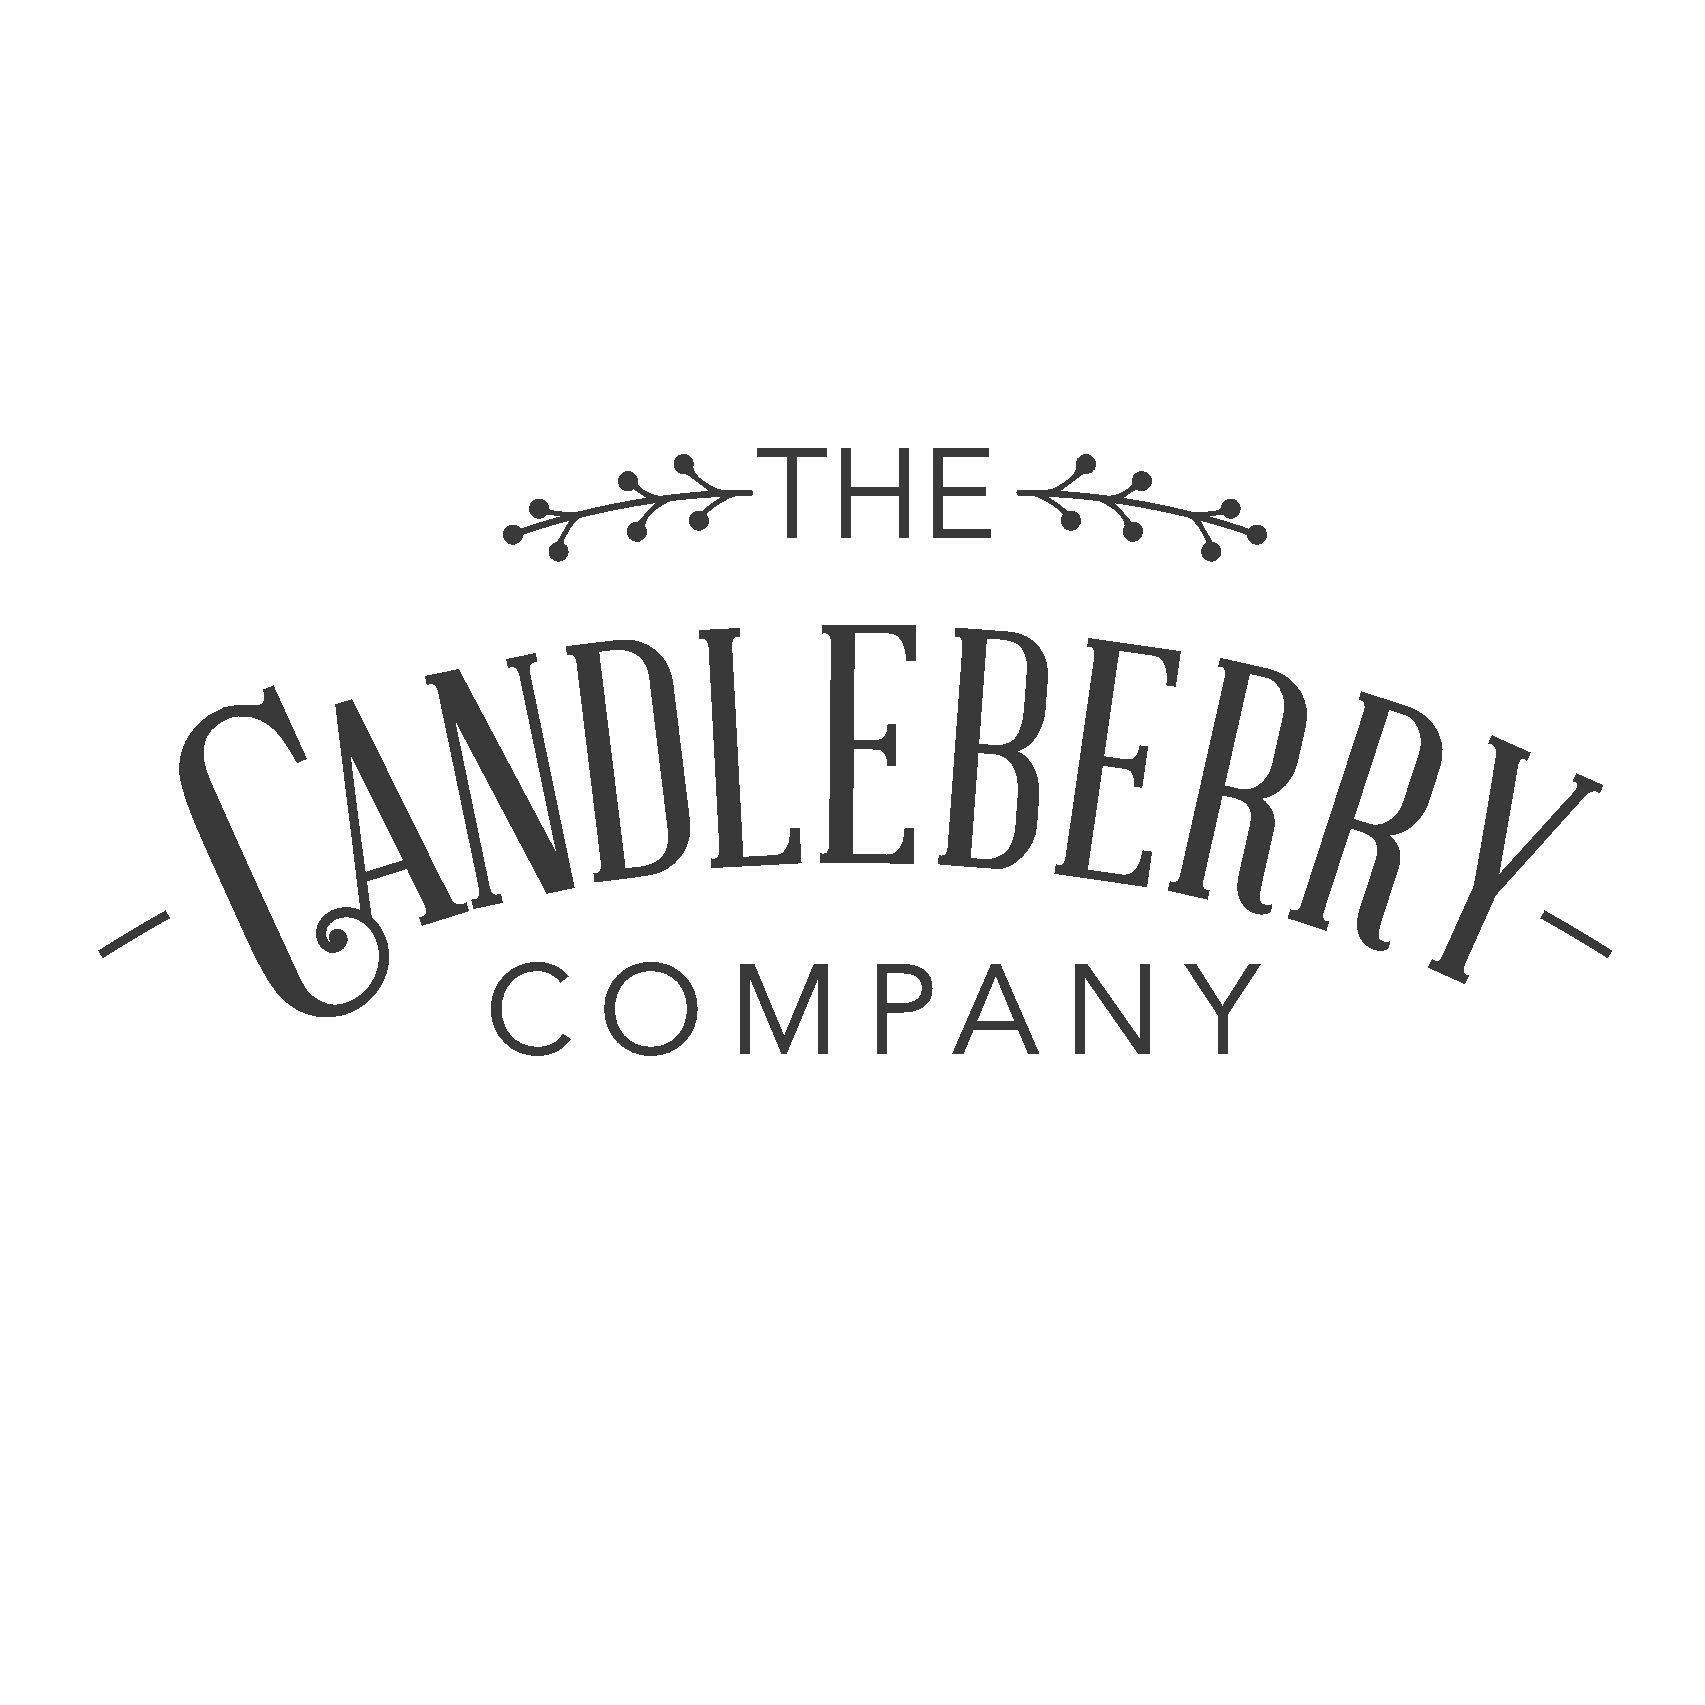 Candleberry Candle Co